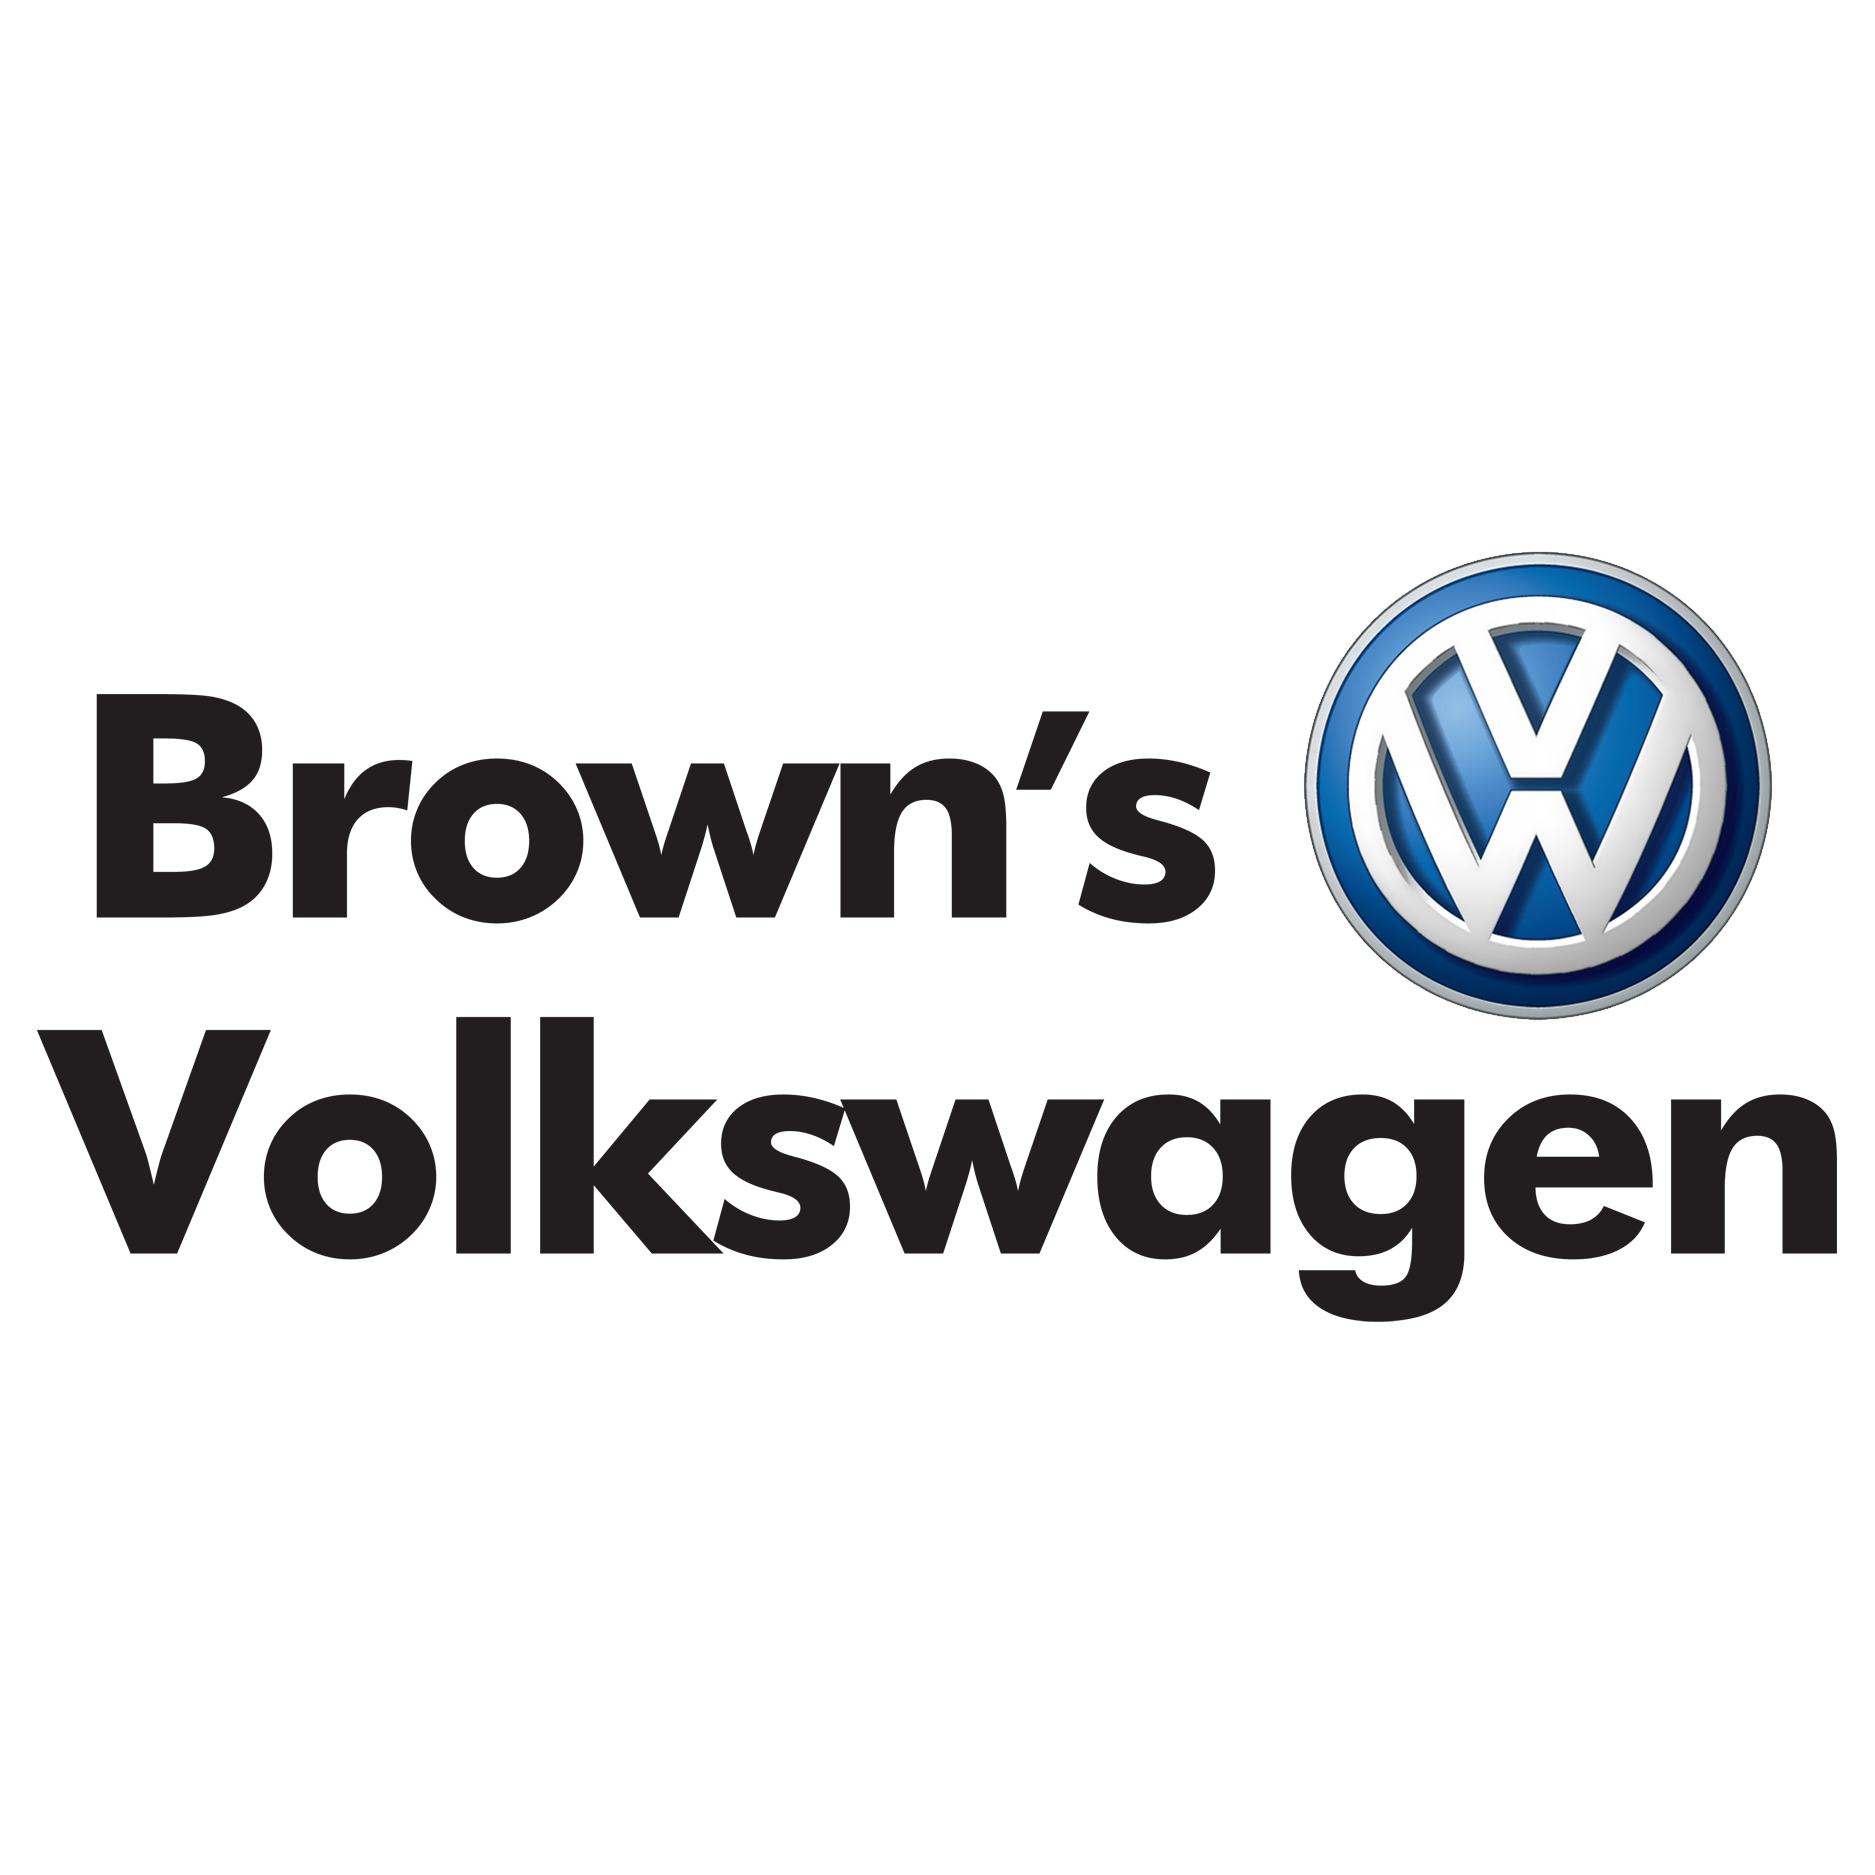 The One and Only Volkswagen Dealership in PEI, With an Award Winning Team in sales and service! Follow us for updates. 190 Sherwood Road Charlottetown, PE